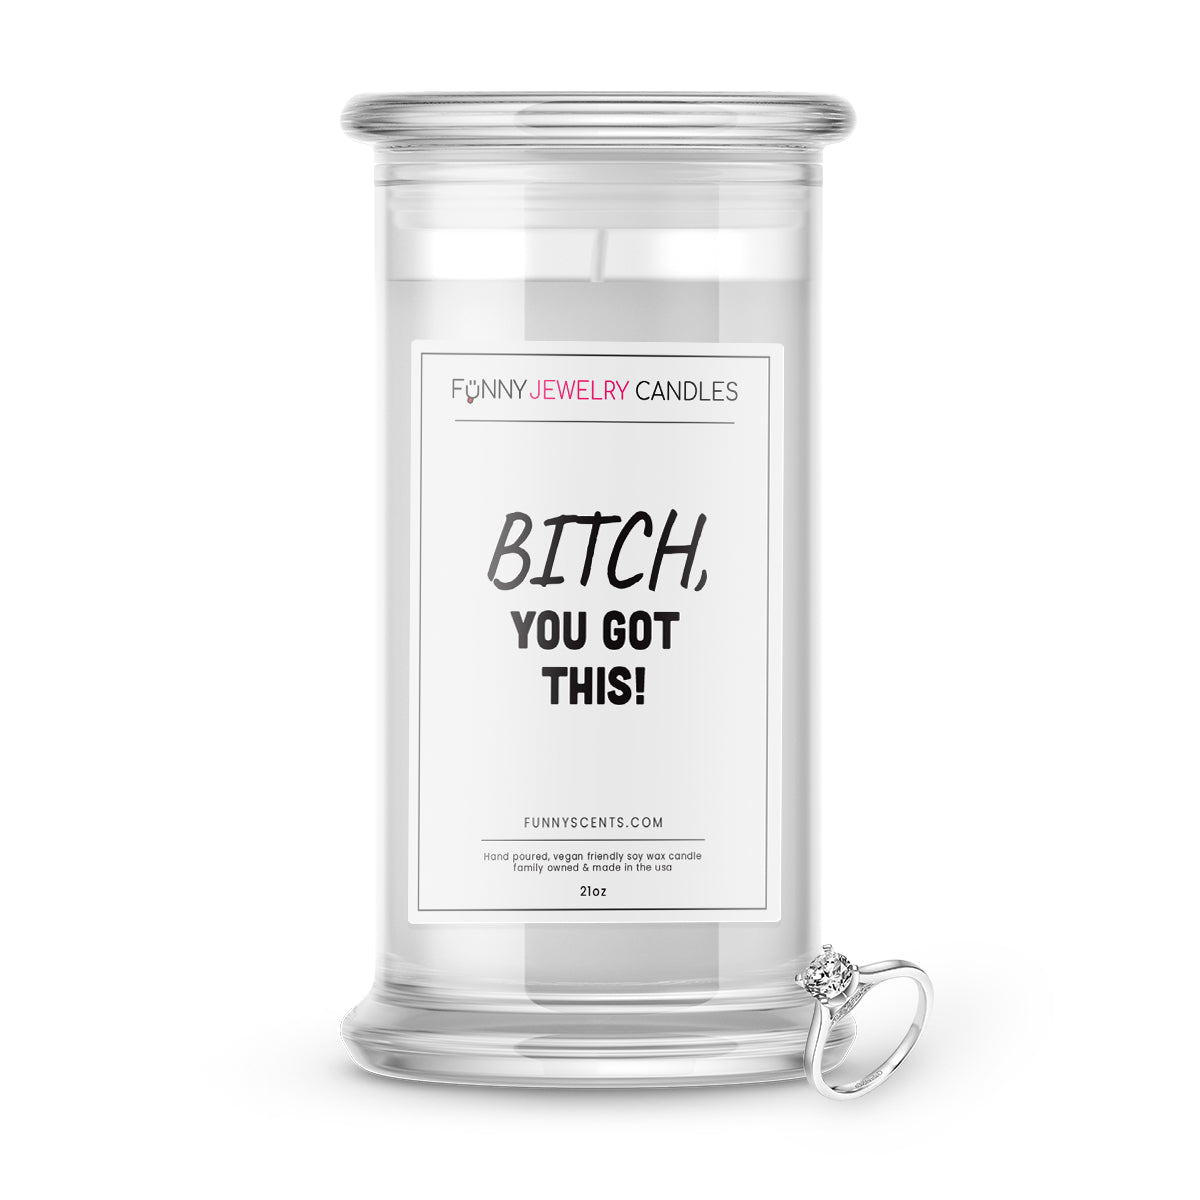 Bitch, You Got This! Jewelry Funny Candles